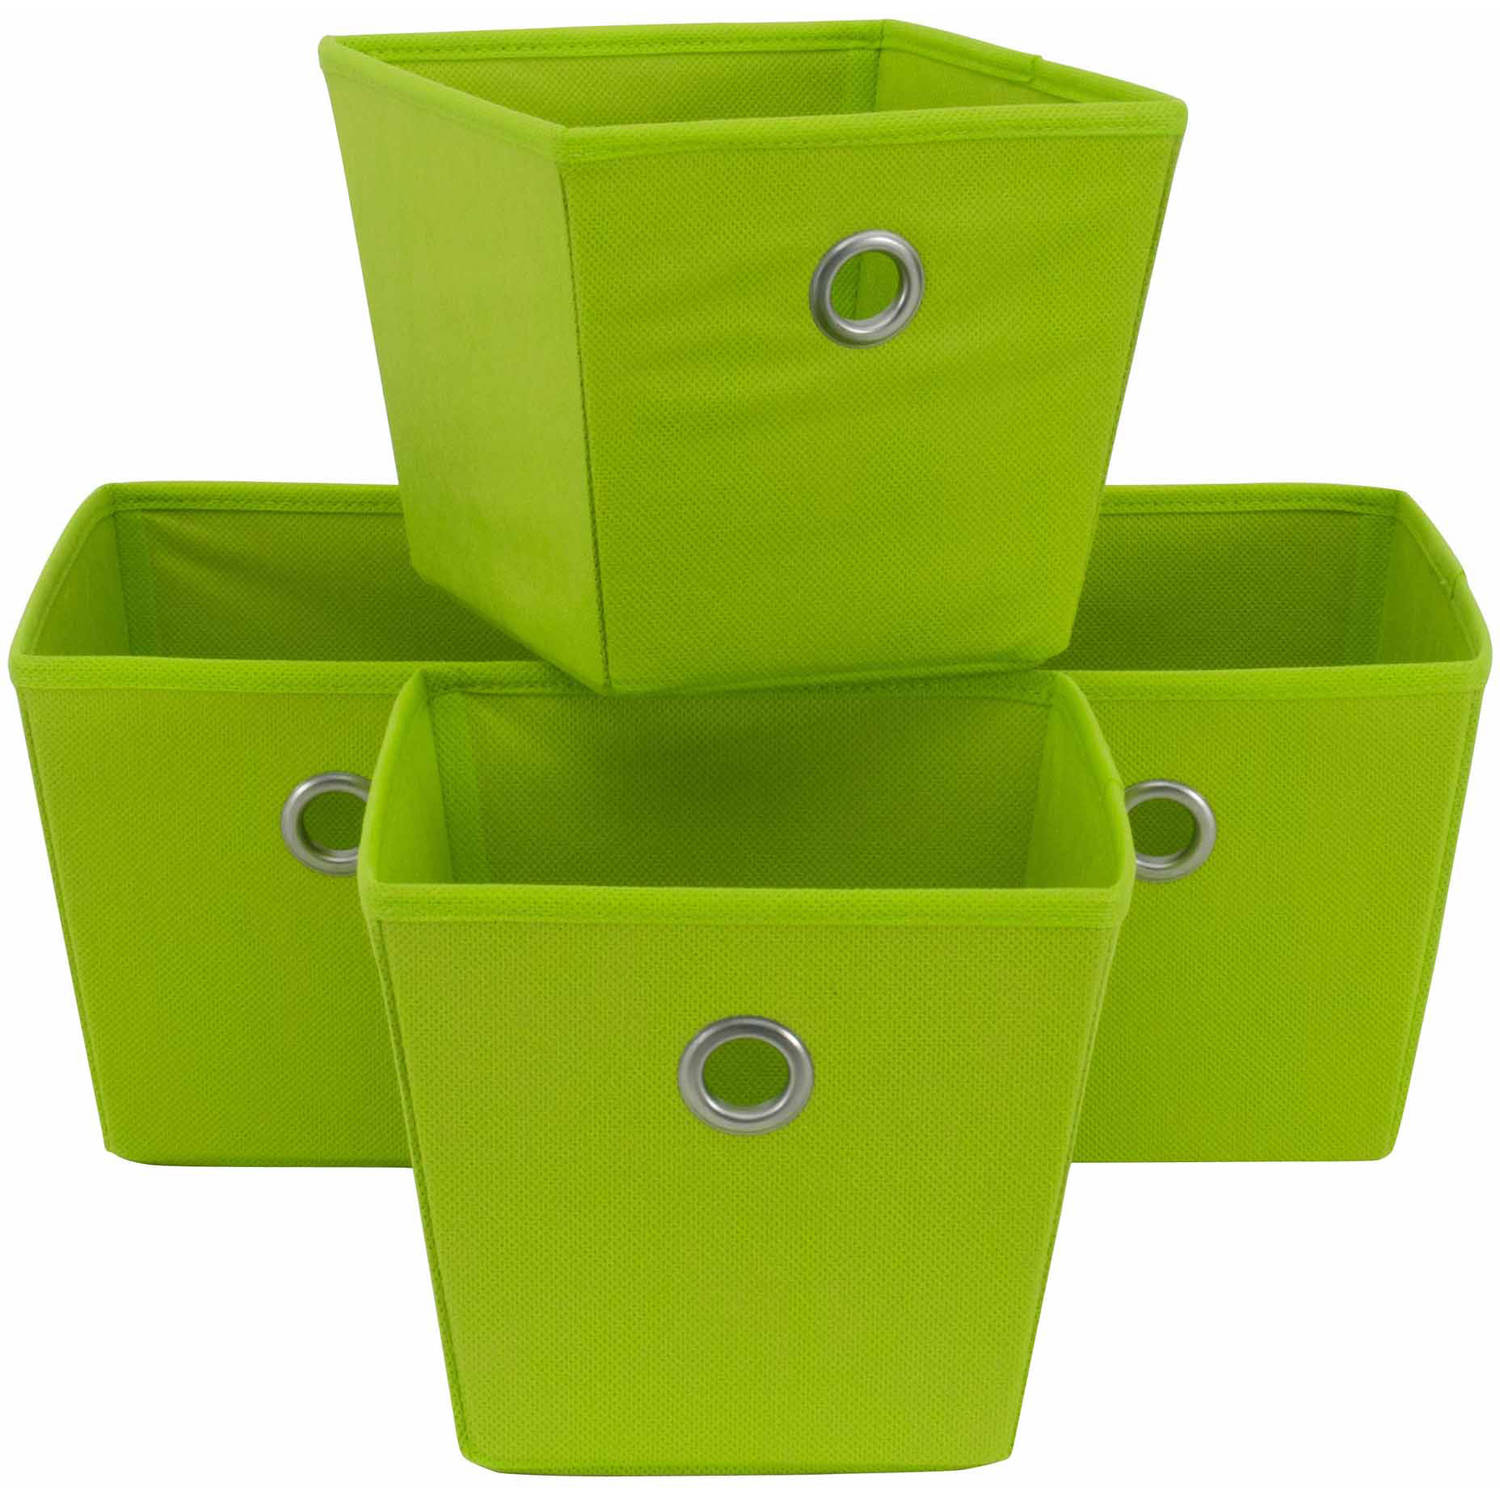 Mainstays Non-Woven Bins | Store Items on Shelves or in a Closet, 4-Pack (Lime Mambo) - image 1 of 1